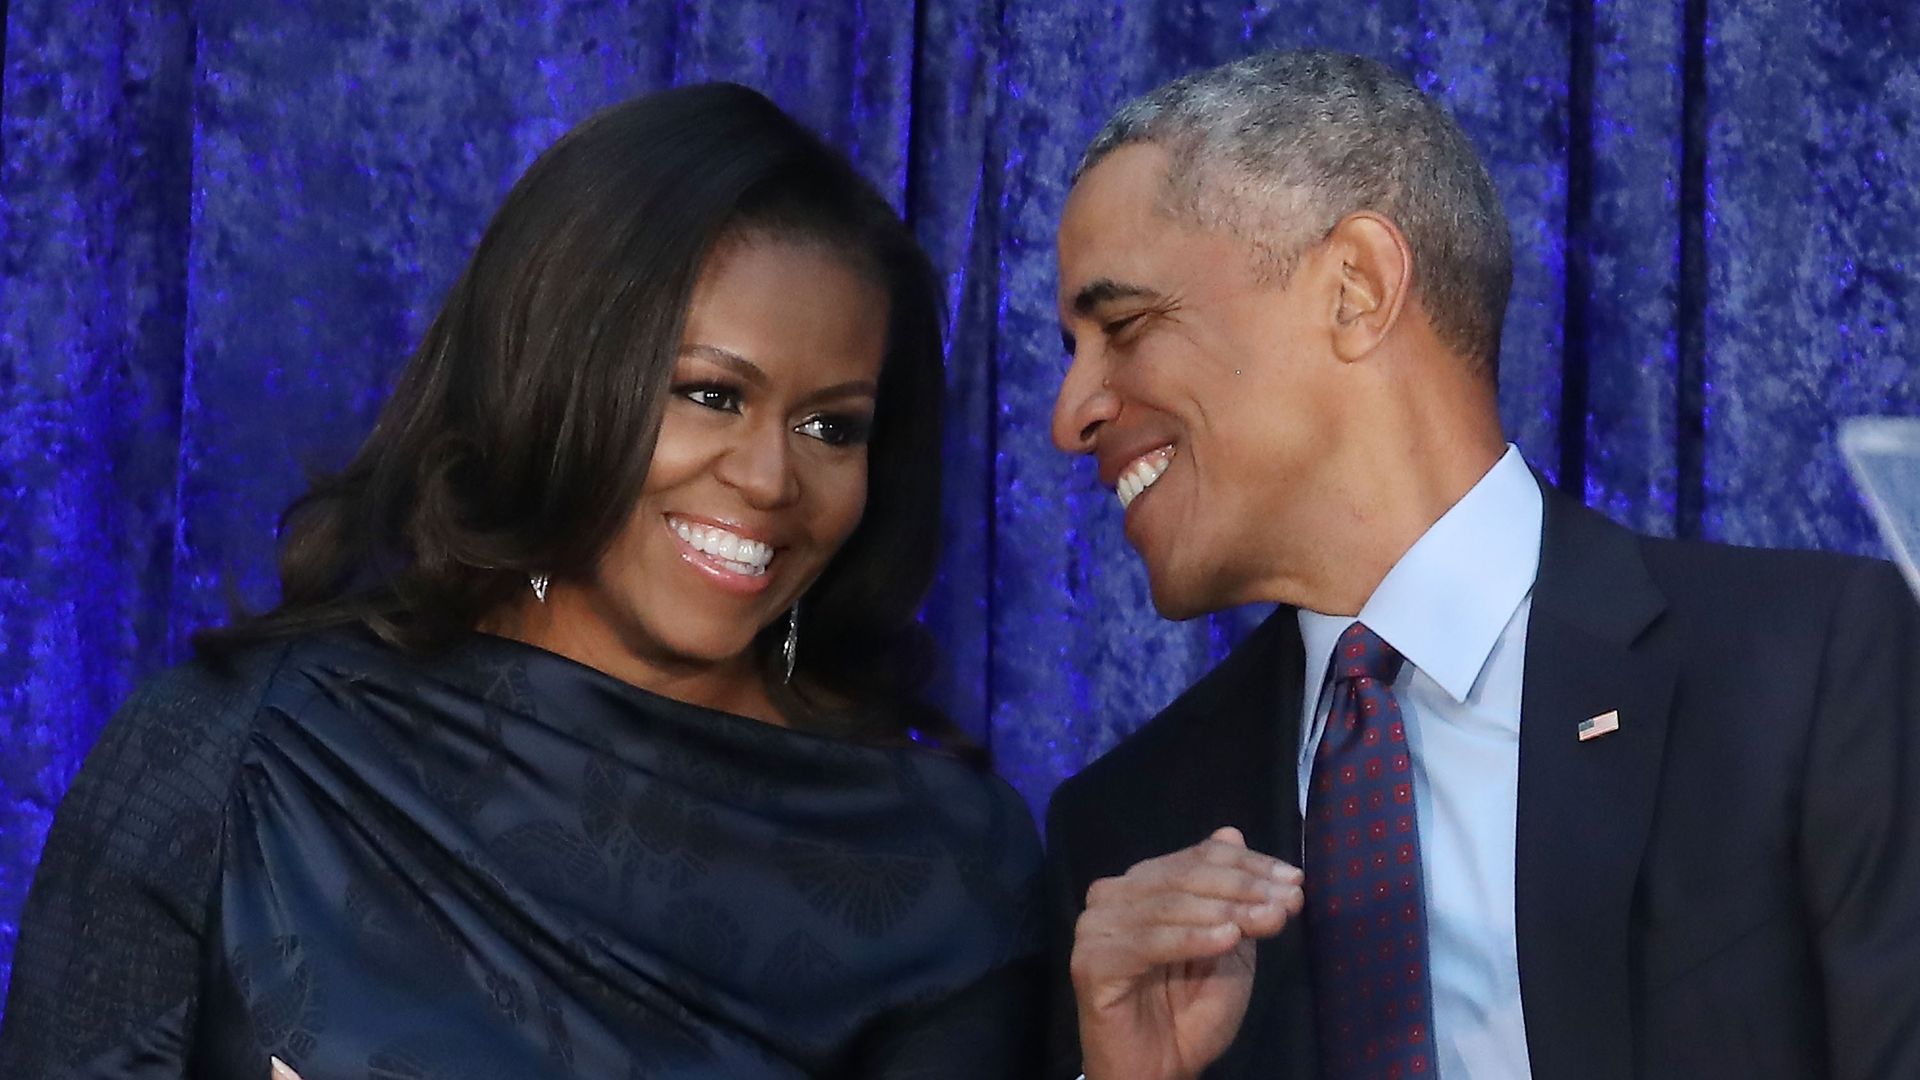 Former U.S. President Barack Obama and first lady Michelle Obama participate in the unveiling of their official portraits during a ceremony at the Smithsonian's National Portrait Gallery, on February 12, 2018 in Washington, DC. The portraits were commissioned by the Gallery, for Kehinde Wiley to create President Obama's portrait, and Amy Sherald that of Michelle Obama